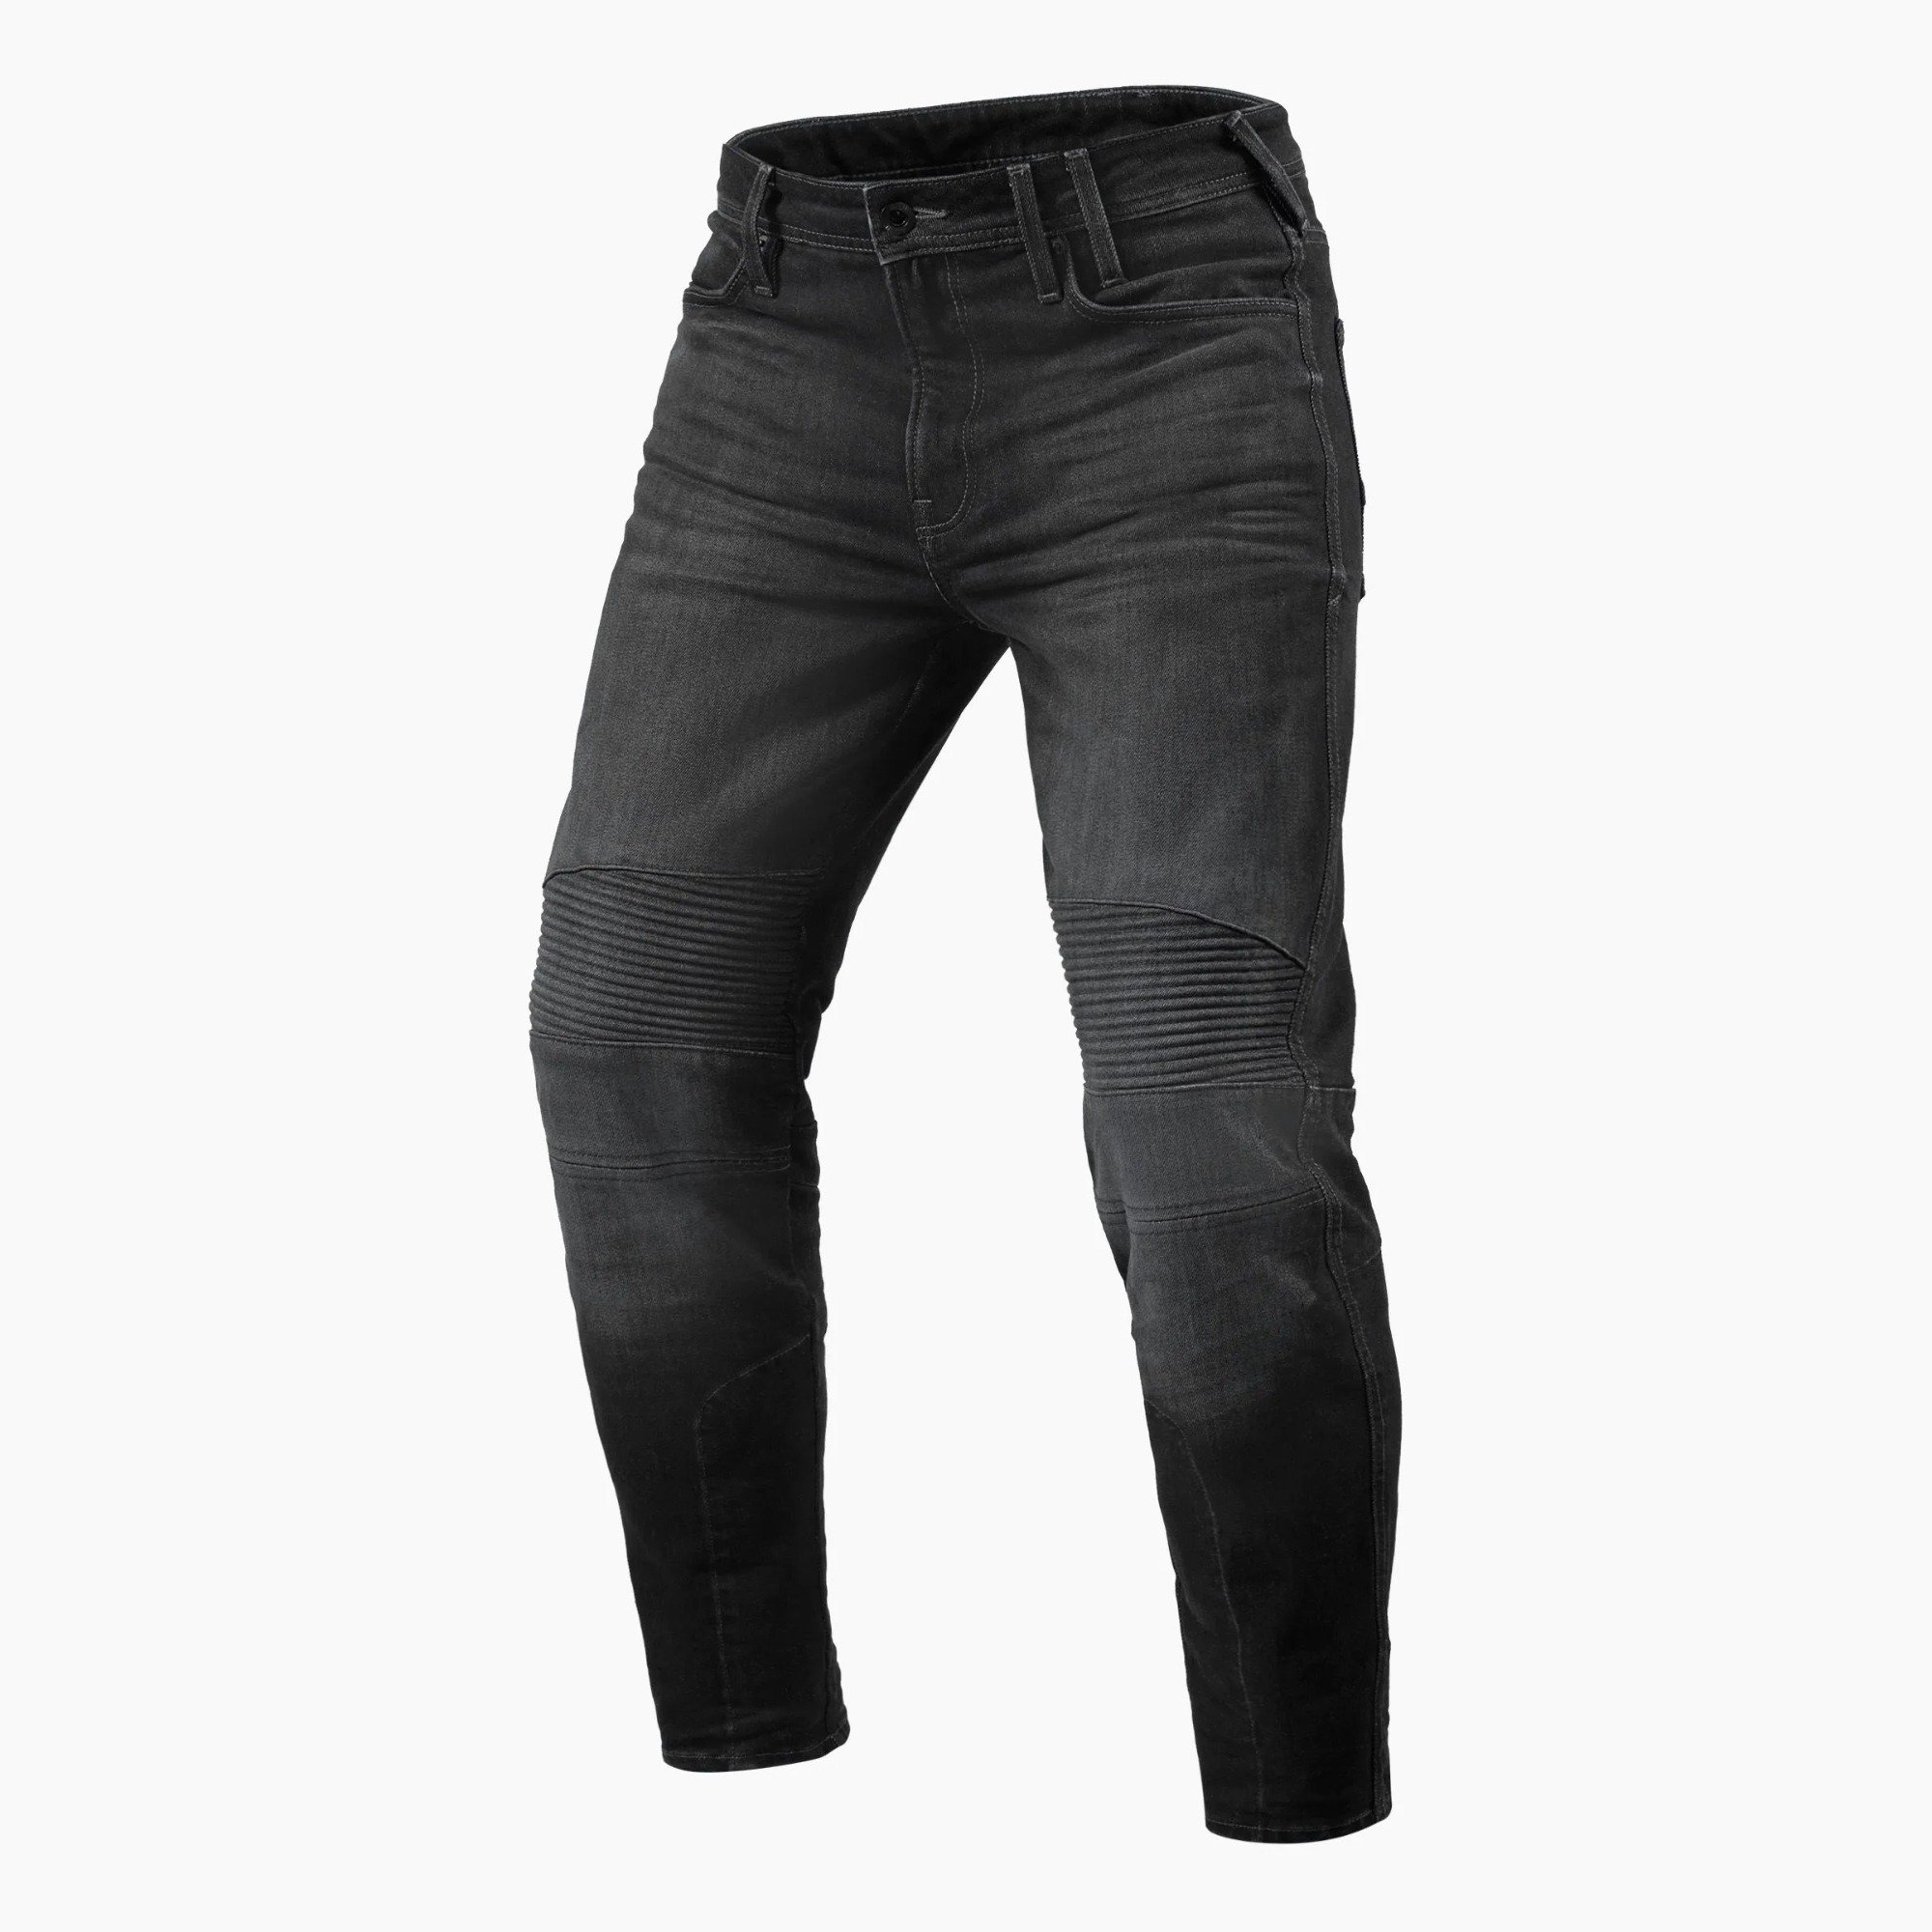 Image of REV'IT! Jeans Moto 2 TF Dark Grey Used Motorcycle Jeans Size L34/W38 ID 8700001337847